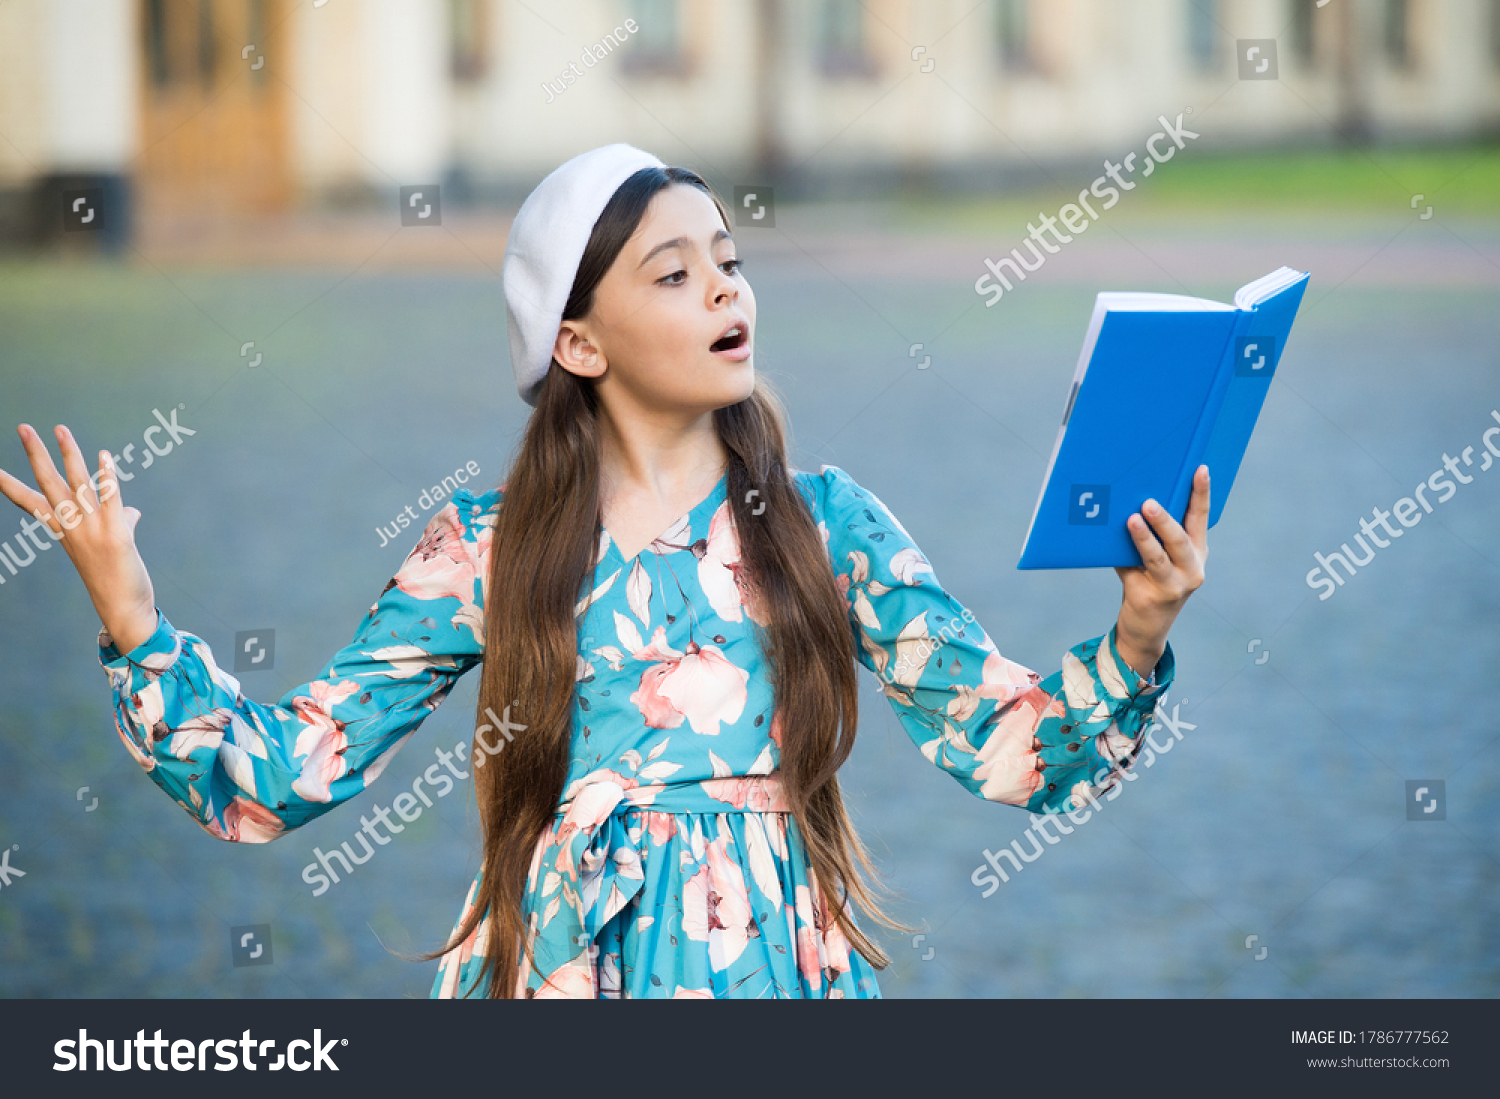 Girl student reading book outdoors, recite poetry concept. #1786777562